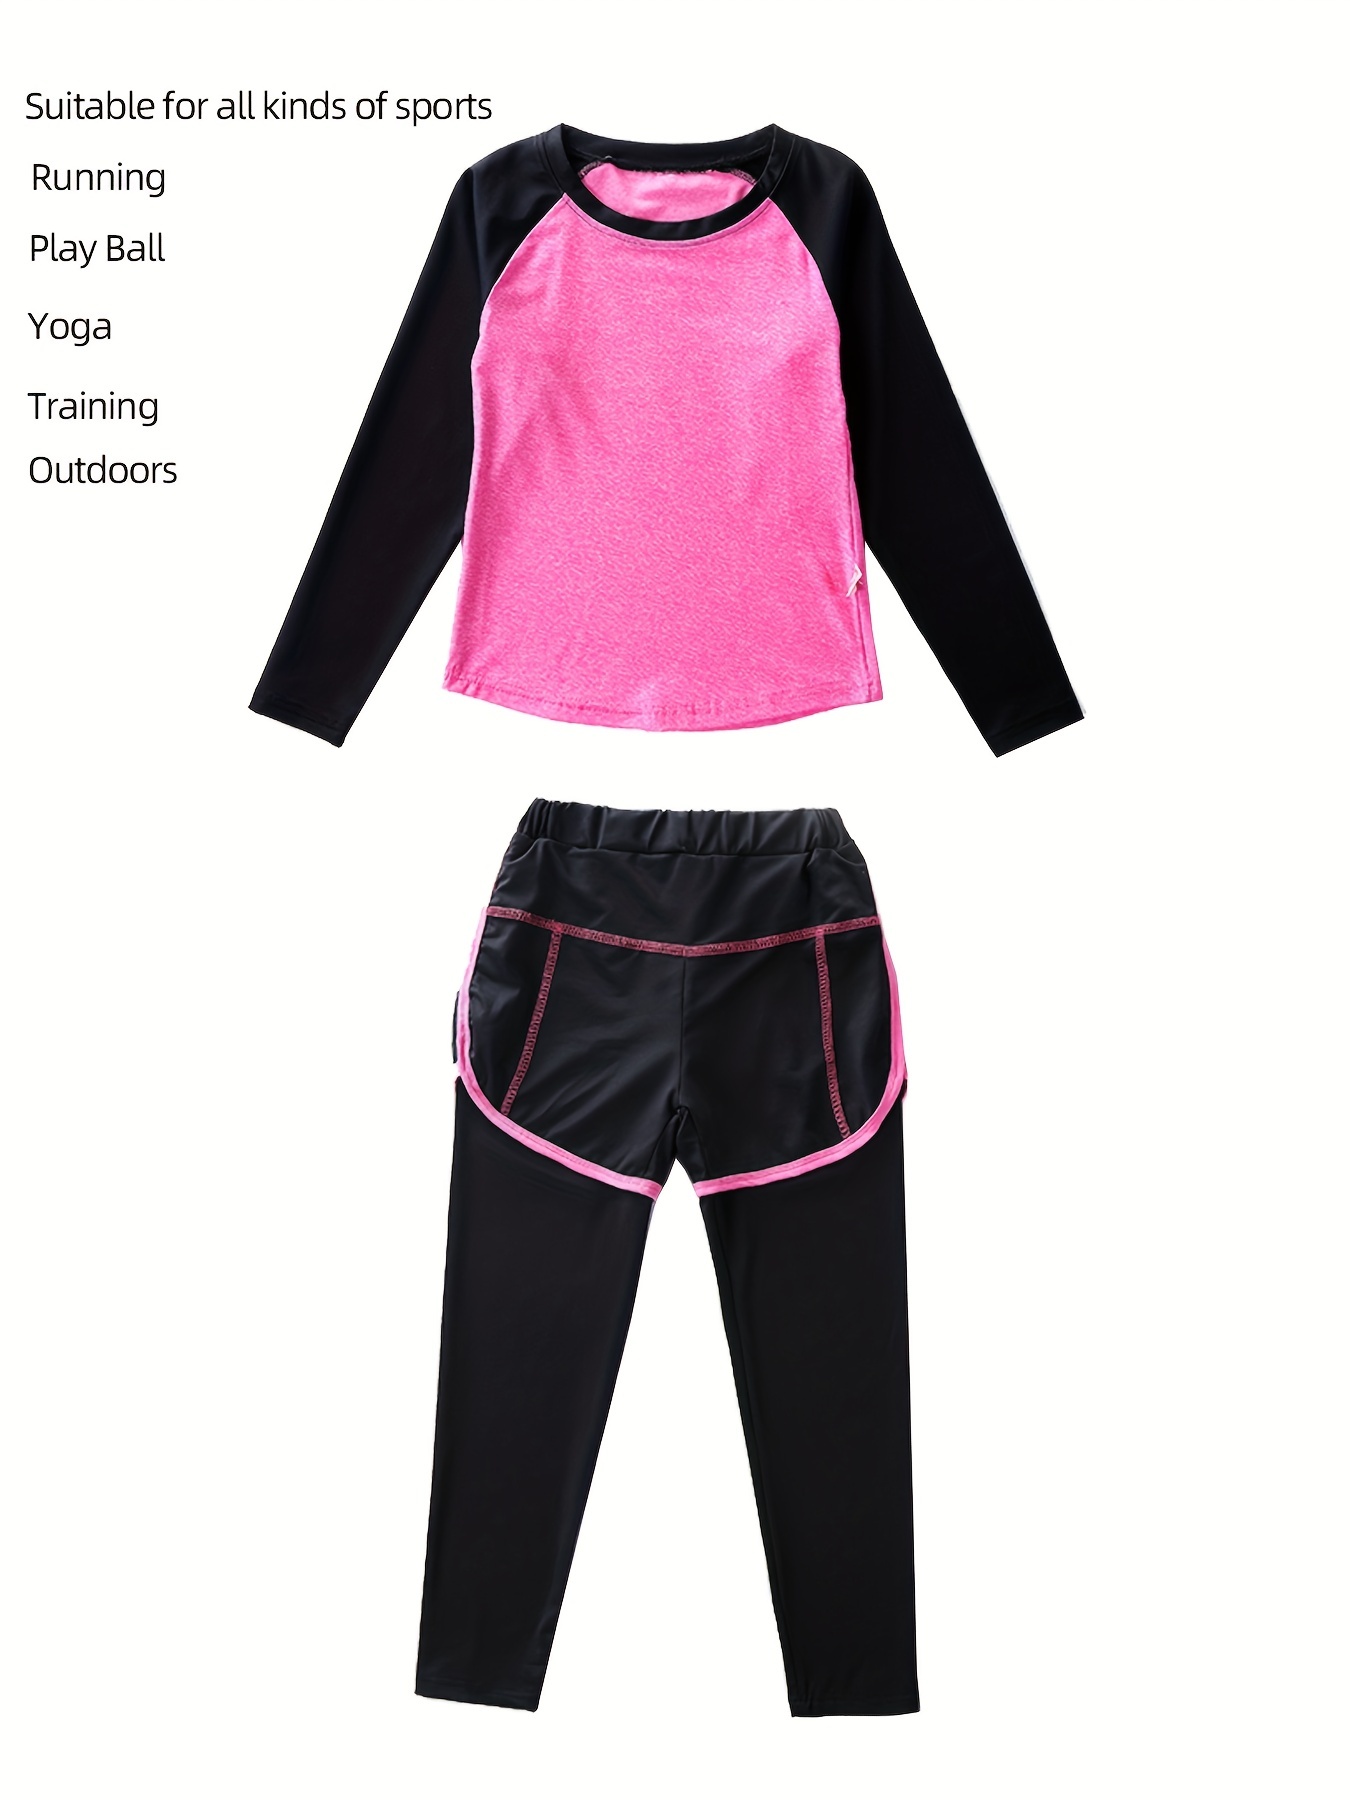 Girls Athletic Clothes Kids Toddler Children Unisex Spring Summer Active  Fashion Daily Daily Indoor Girls Wear Tops